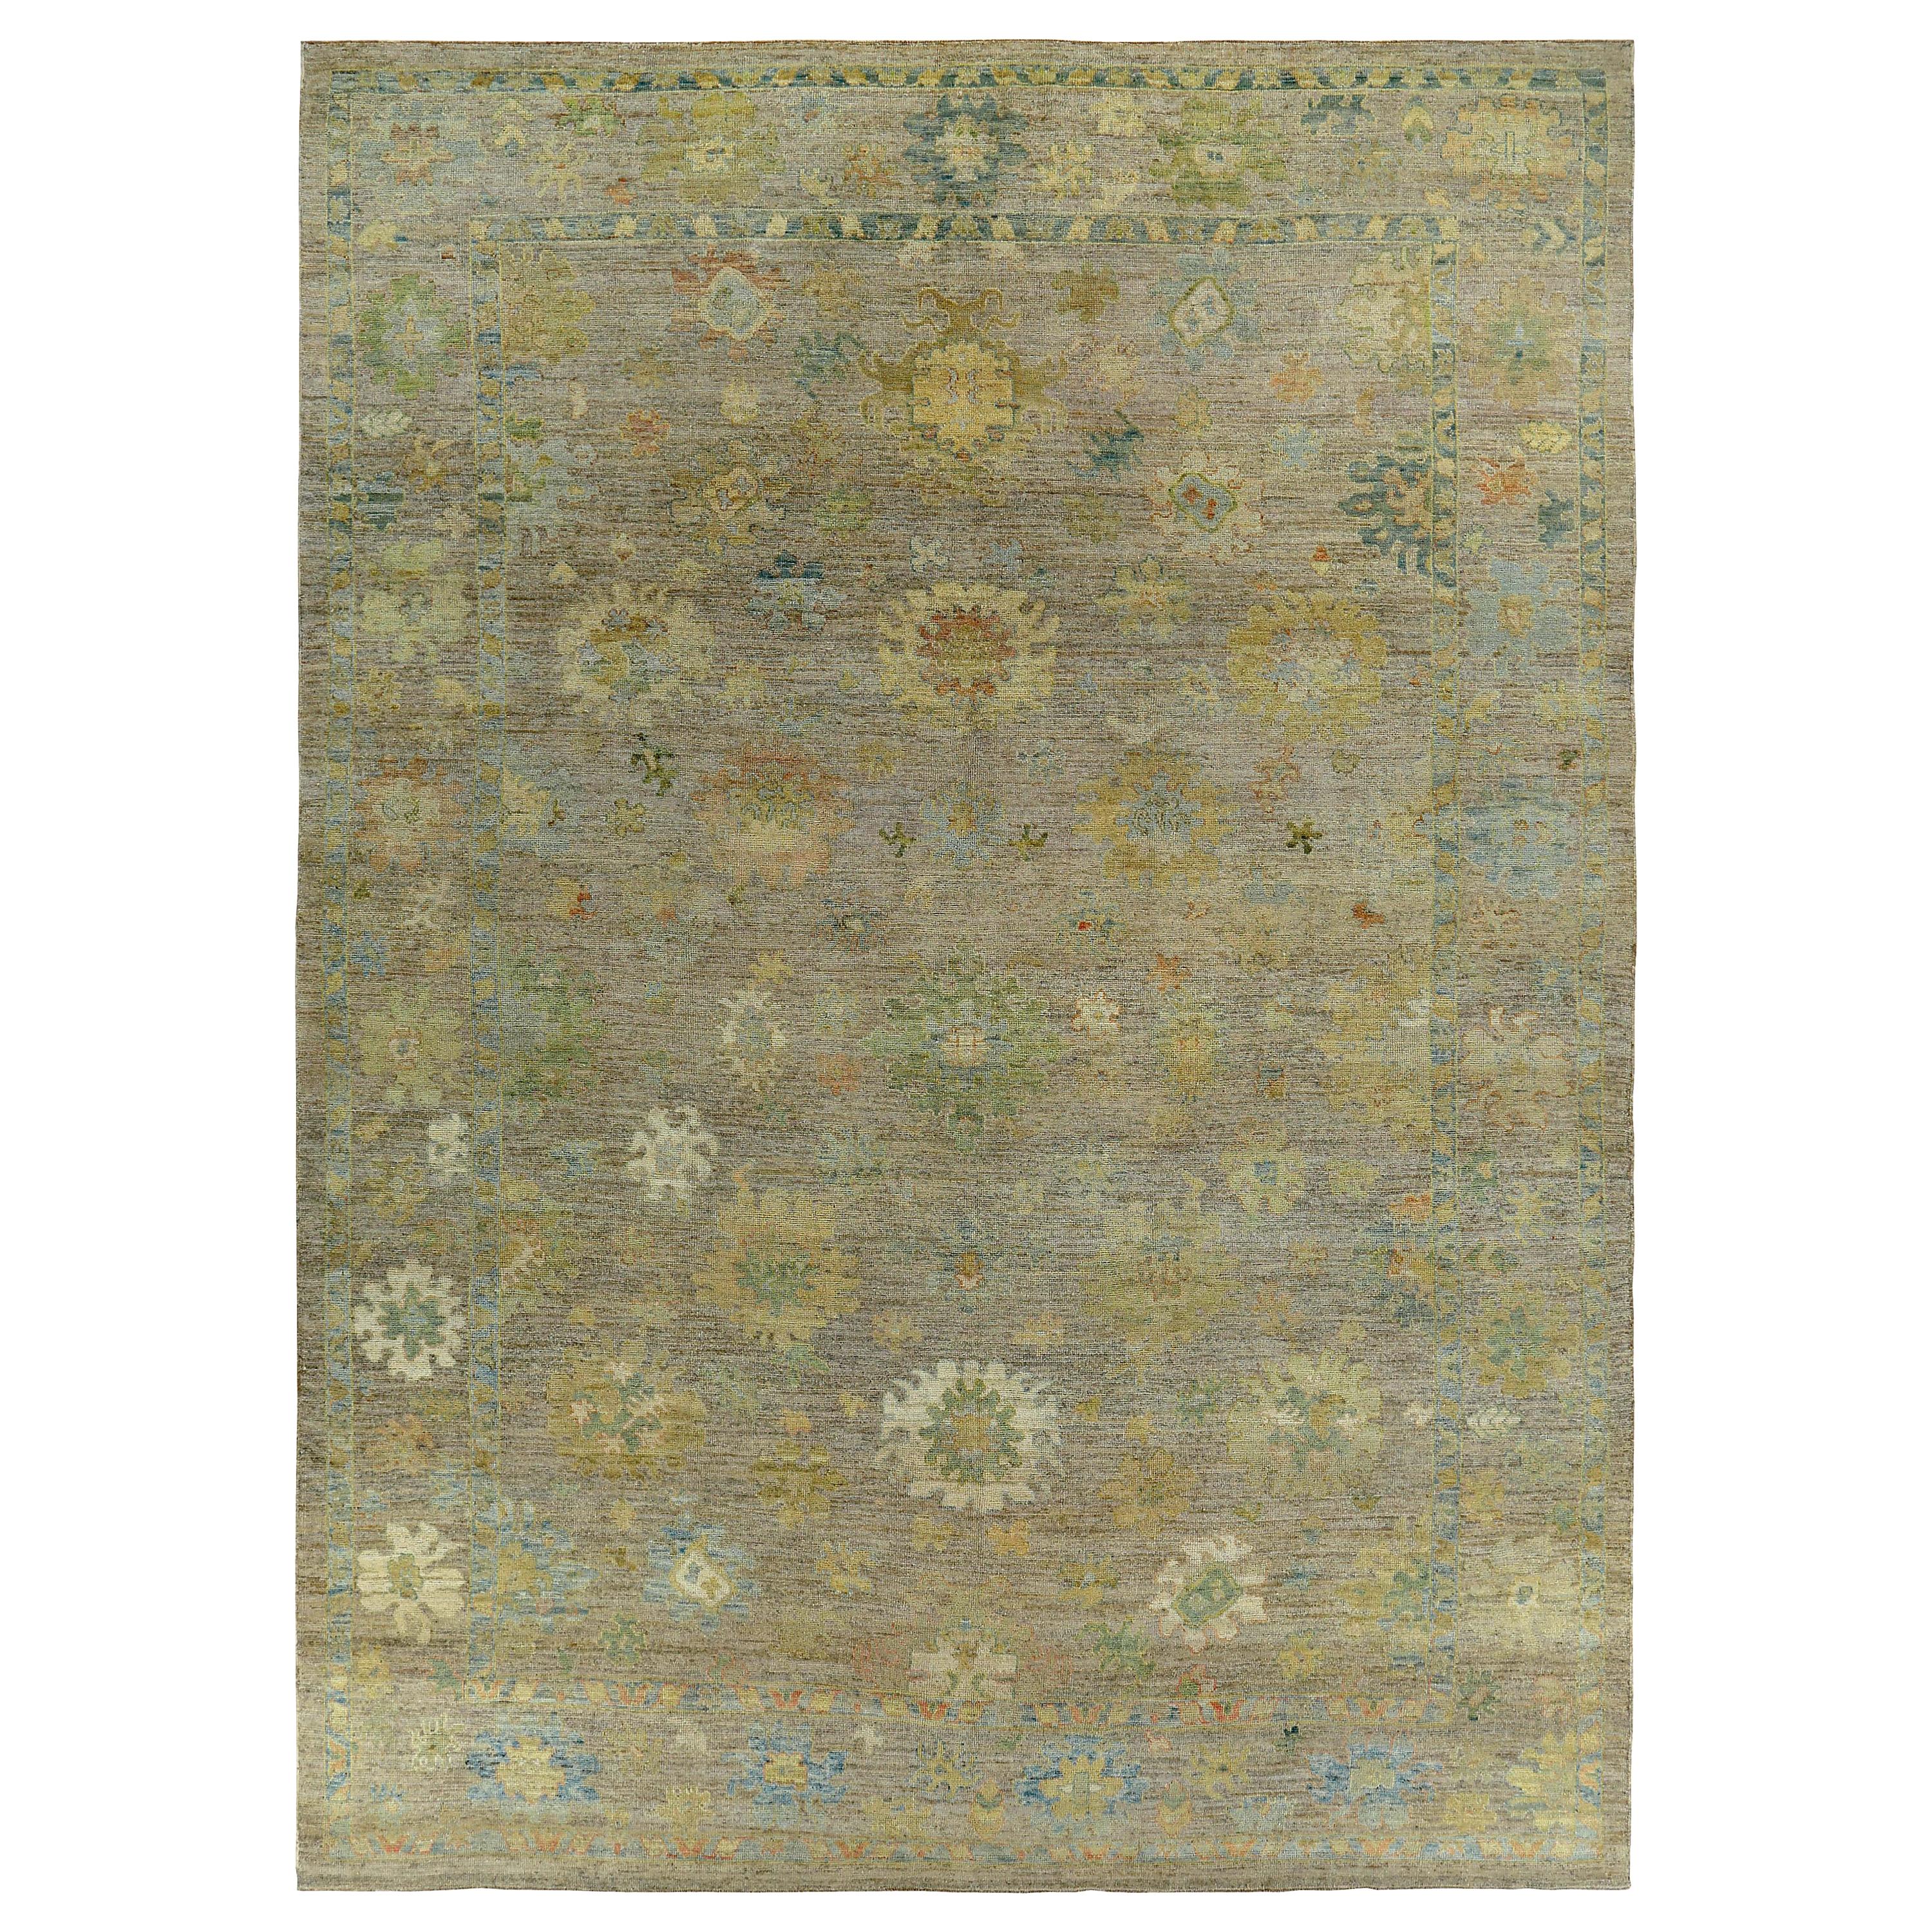 New Turkish Oushak Rug with Green and Yellow Floral Design on a Brown Field For Sale